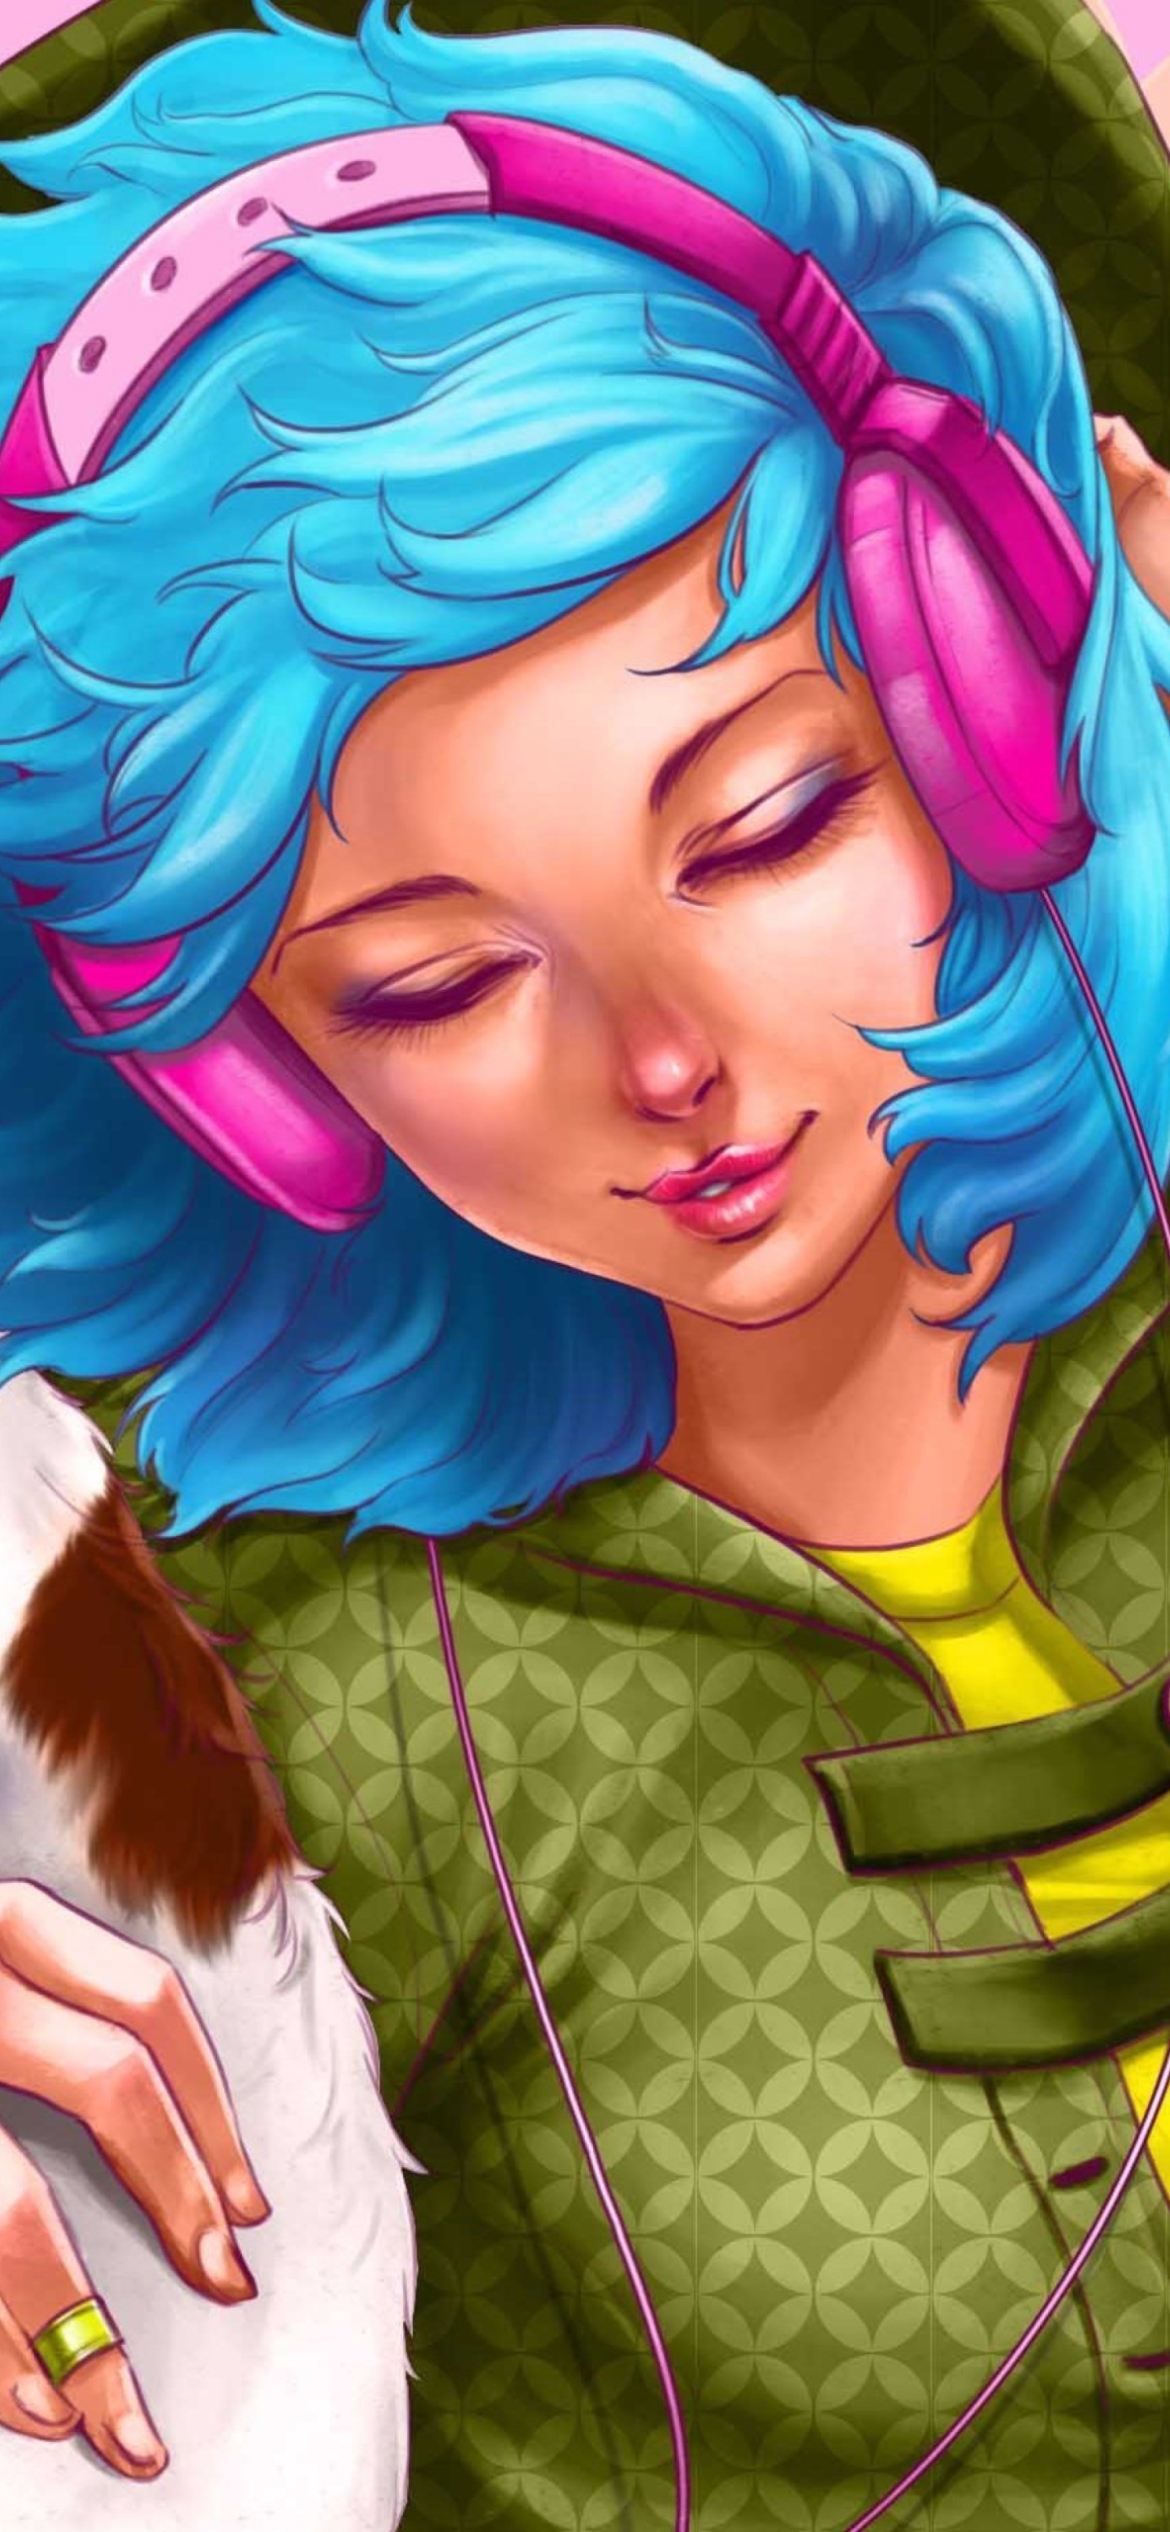 Das Girl With Blue Hair And Pink Headphones Drawing Wallpaper 1170x2532